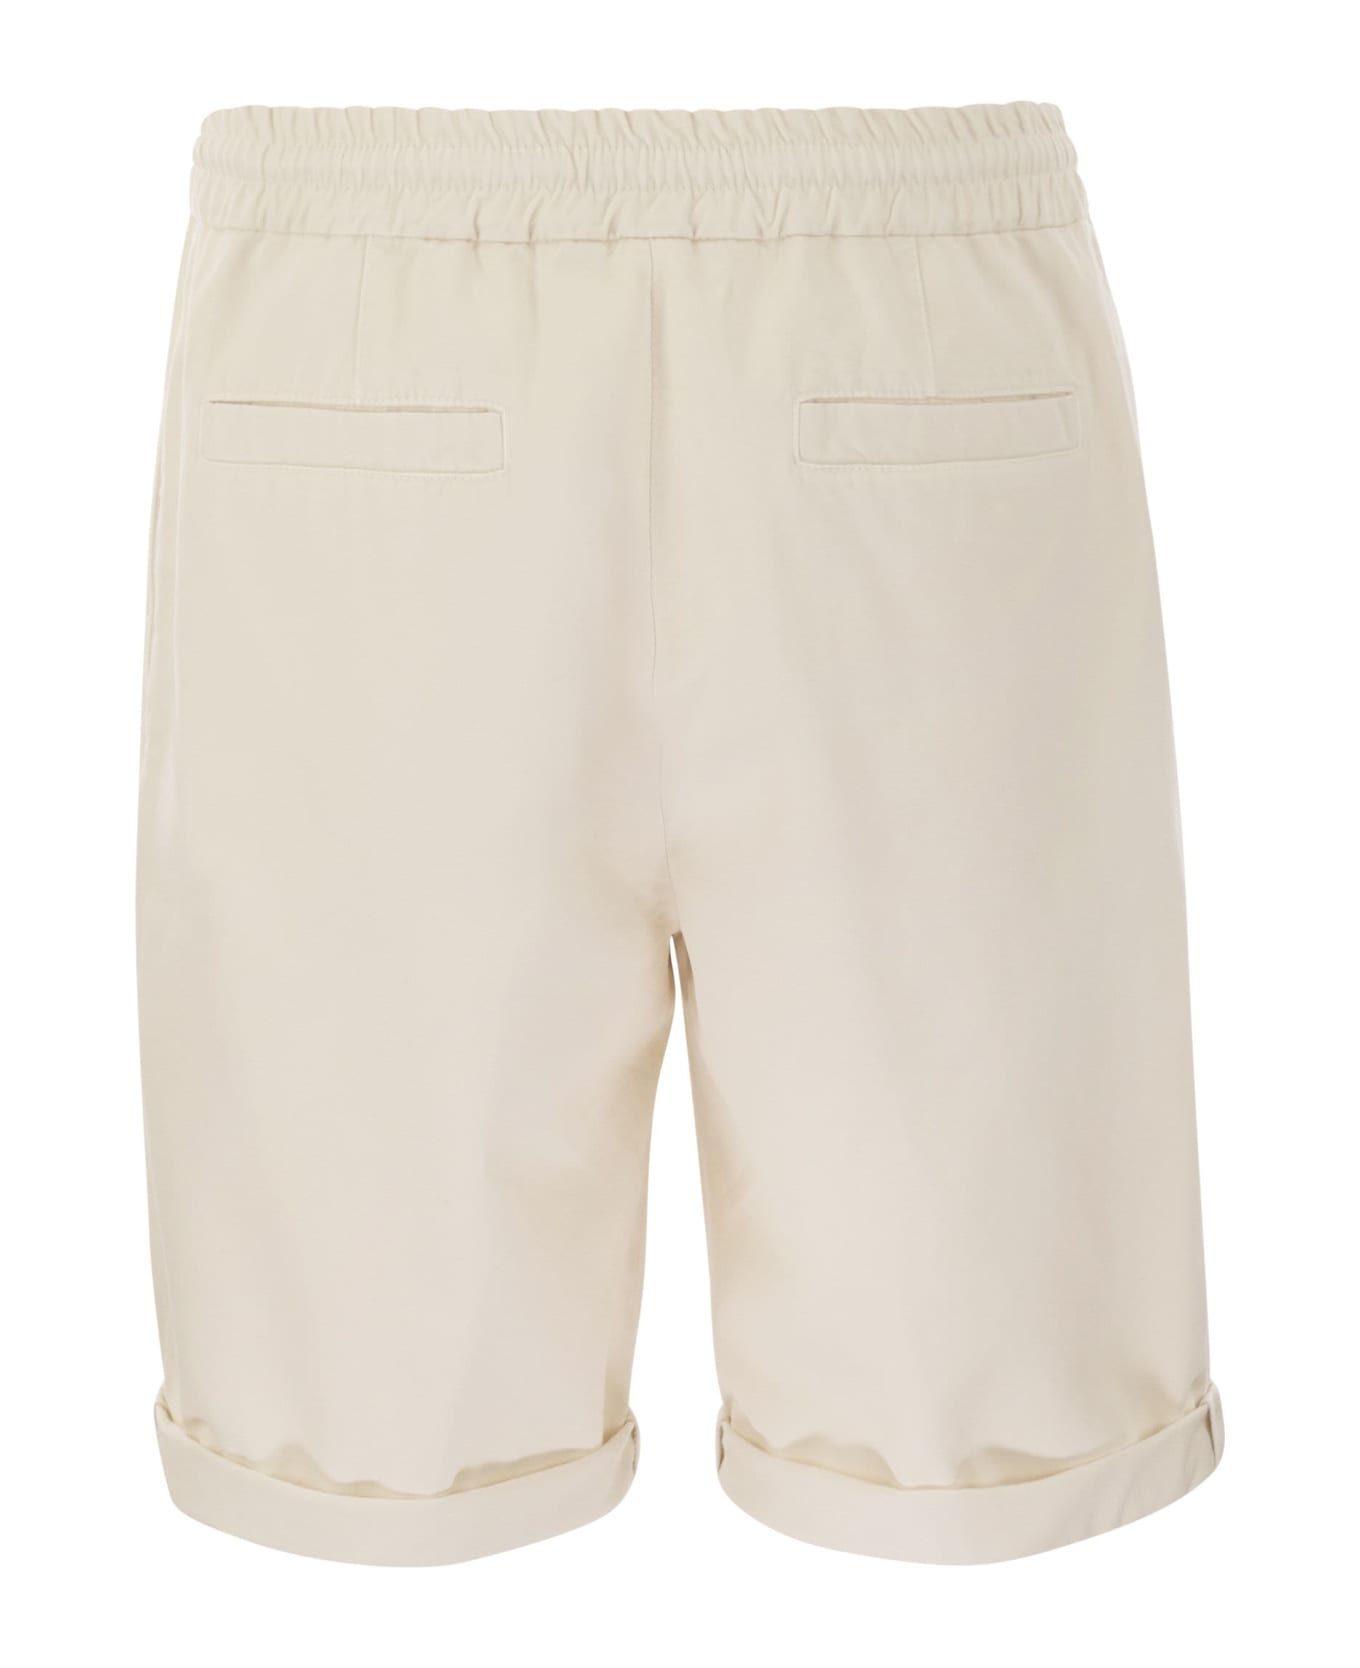 Brunello Cucinelli Bermuda Shorts In Garment-dyed Cotton Gabardine With Drawstring And Double Darts - White ショートパンツ